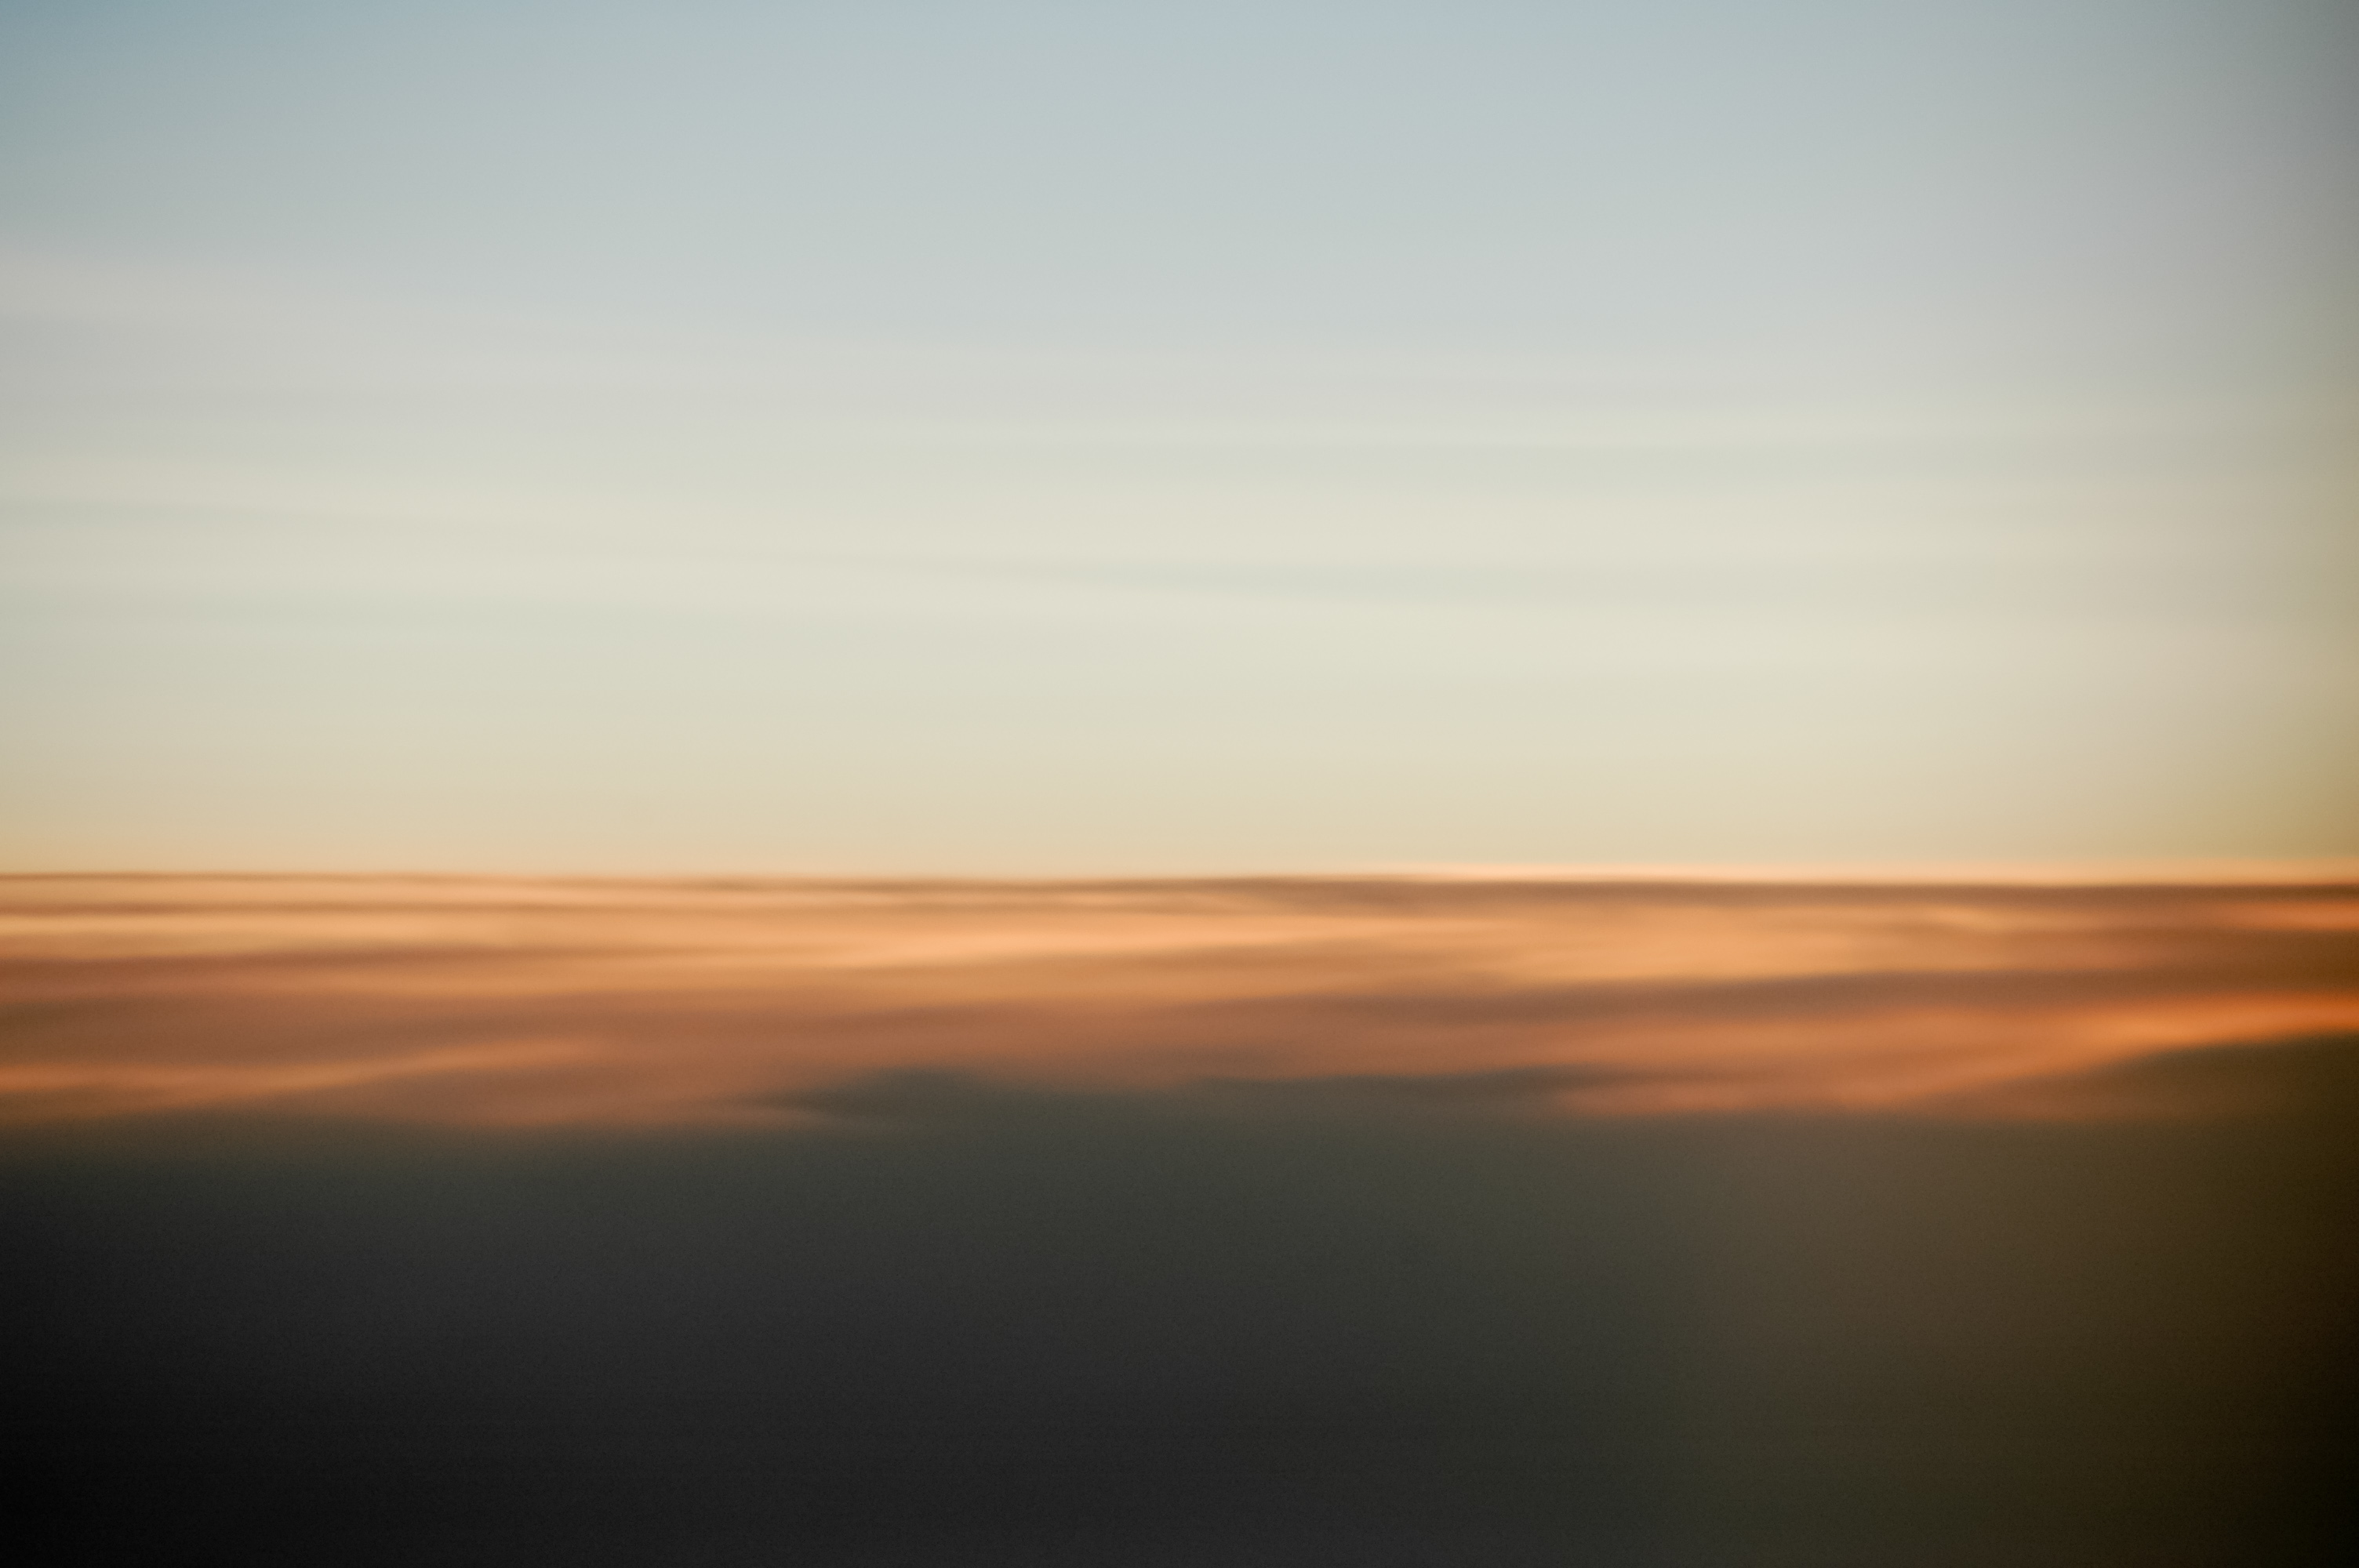 Vague sunrise projection on top of clouds - Pattern Pictures free ...